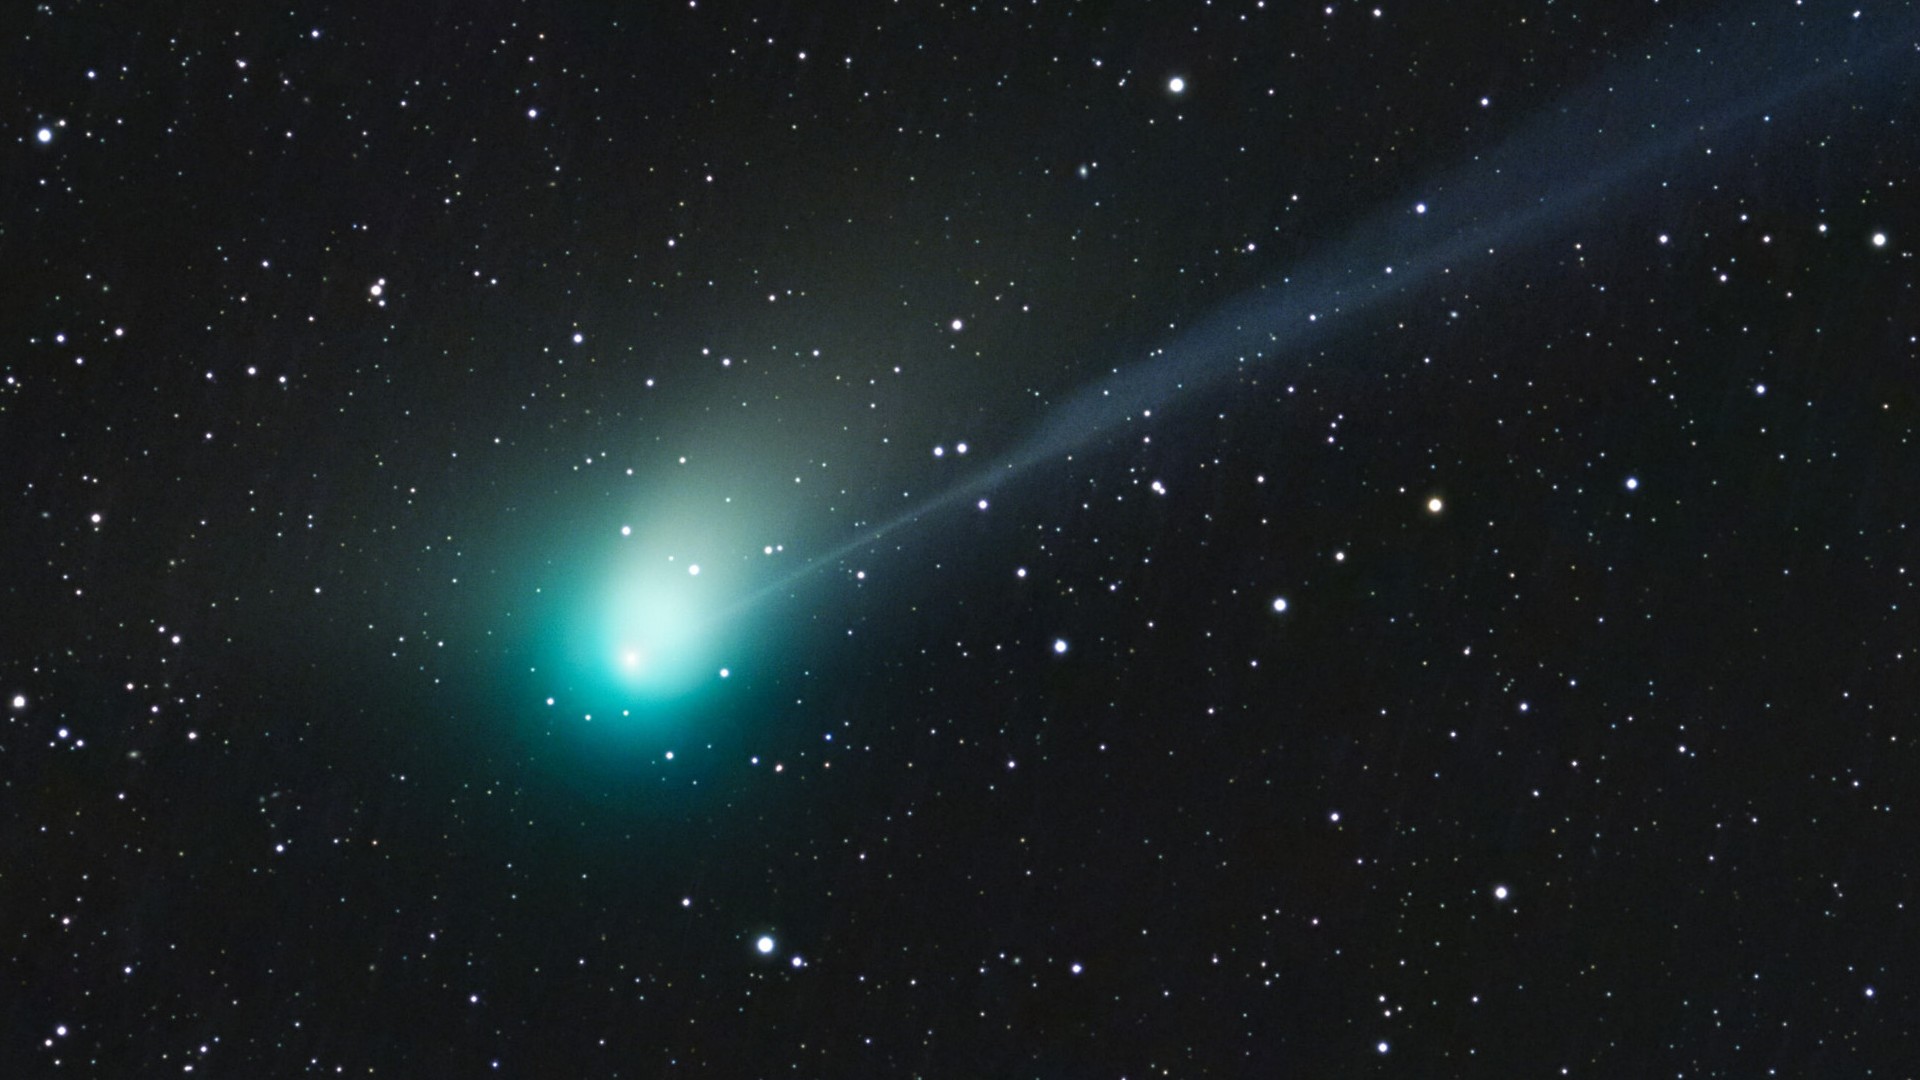 Where and when can you see comet ZTF with the naked eye in France?